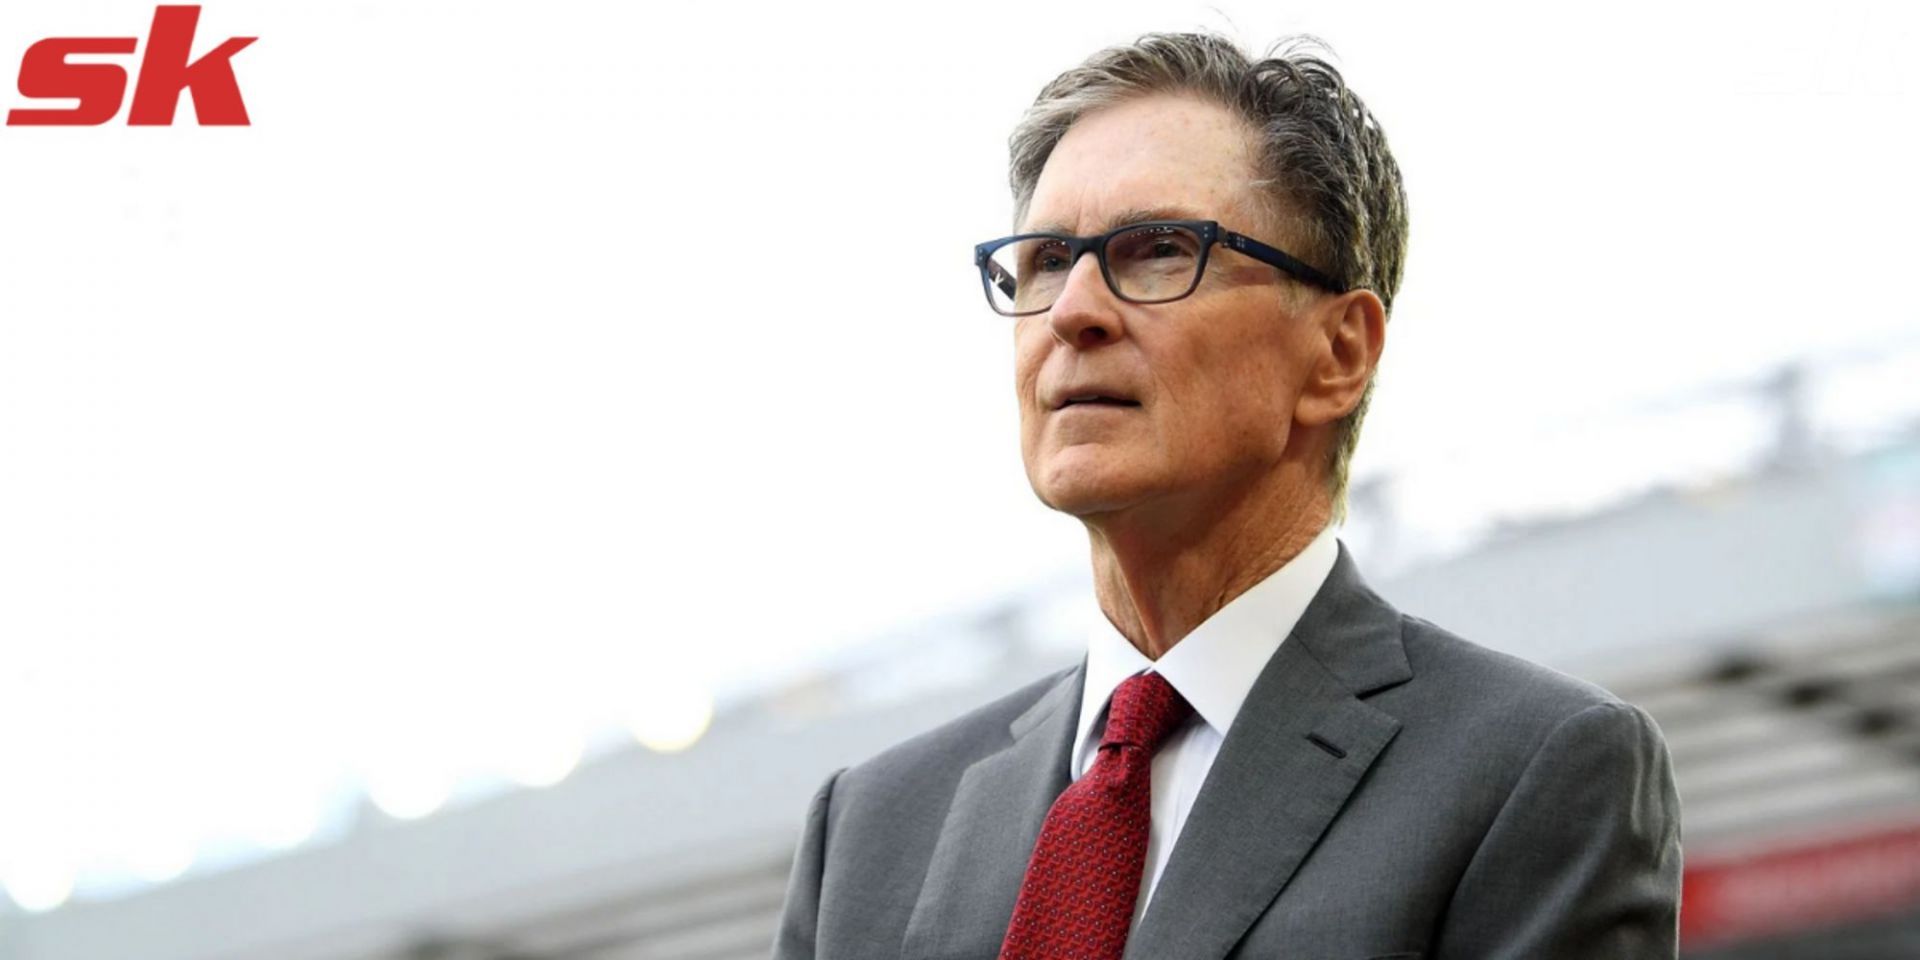 Liverpool FC primary owner John W Henry